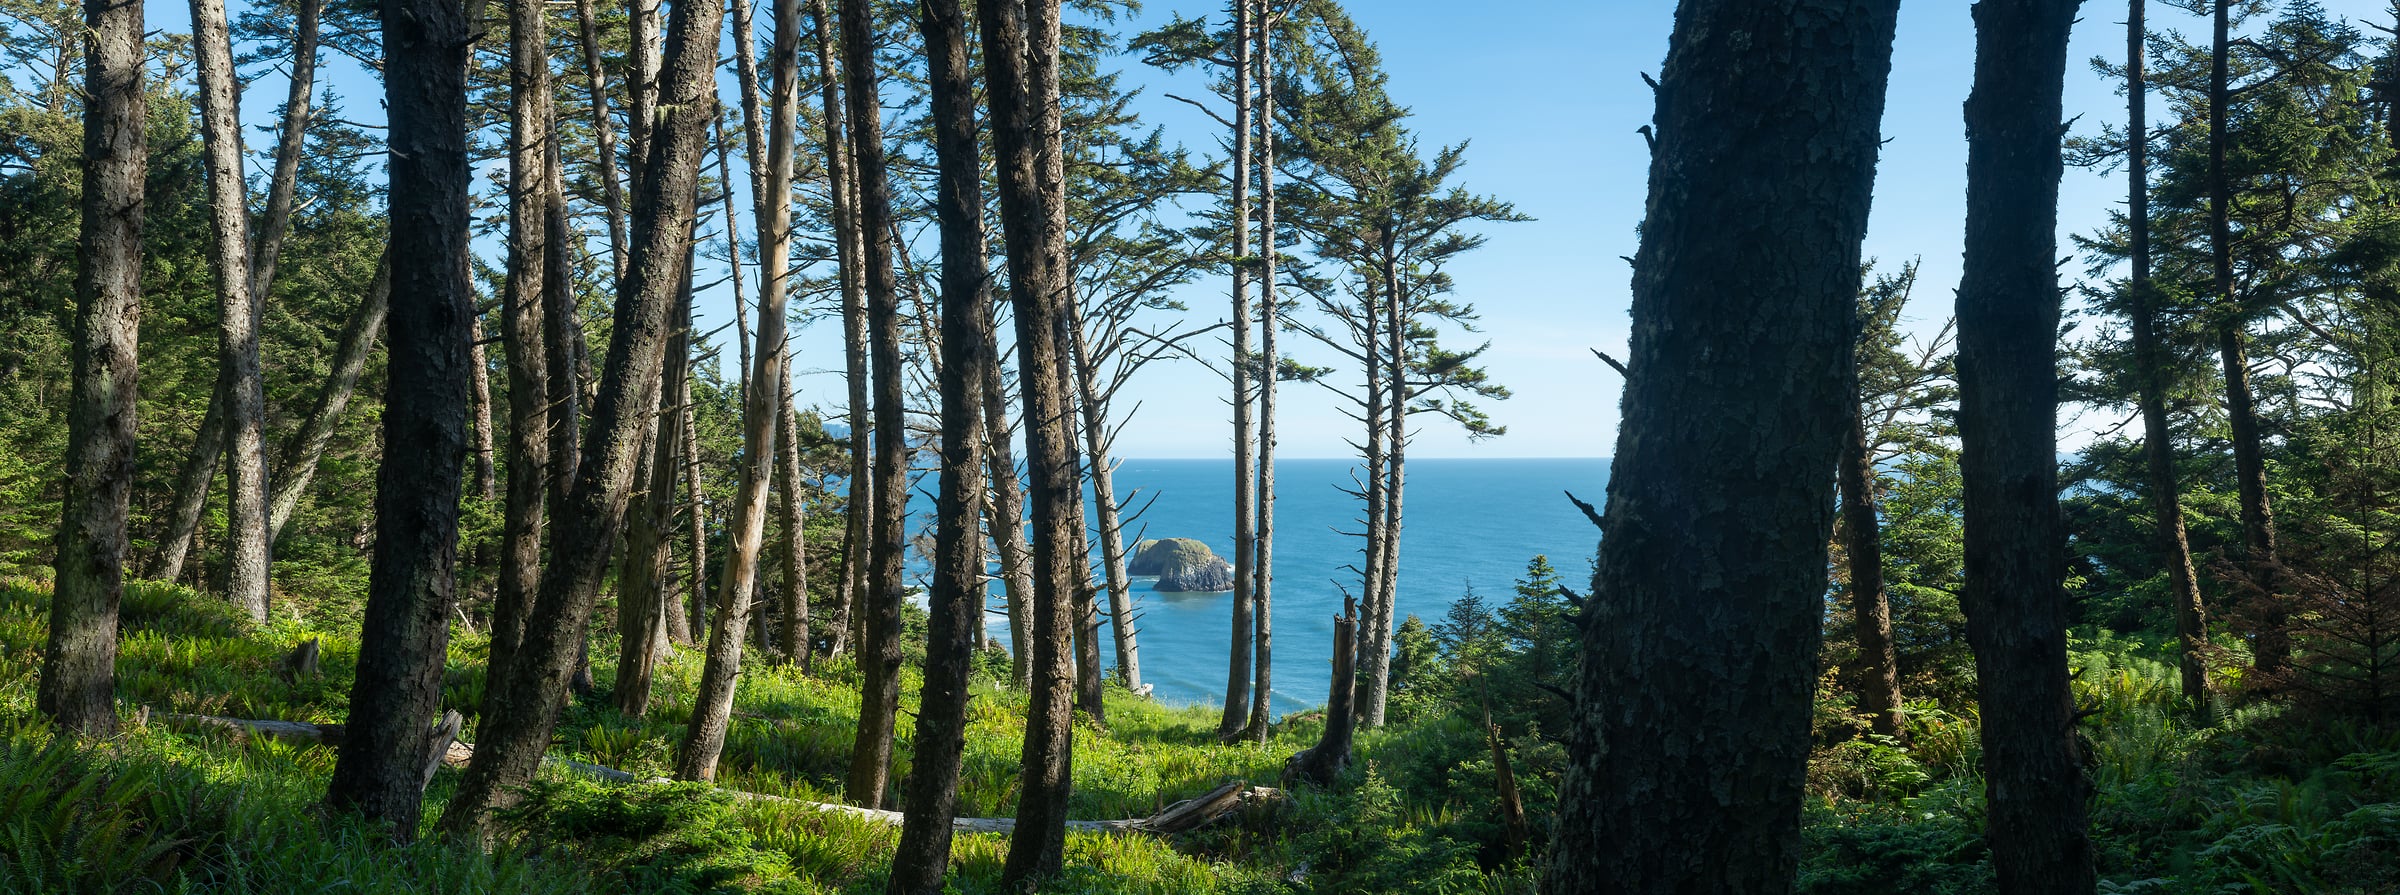 231 megapixels! A very high resolution, large-format VAST photo print of woods, trees, and the coastline; landscape nature photograph created by Greg Probst in Cannon Beach, Ecola State Park, Oregon.